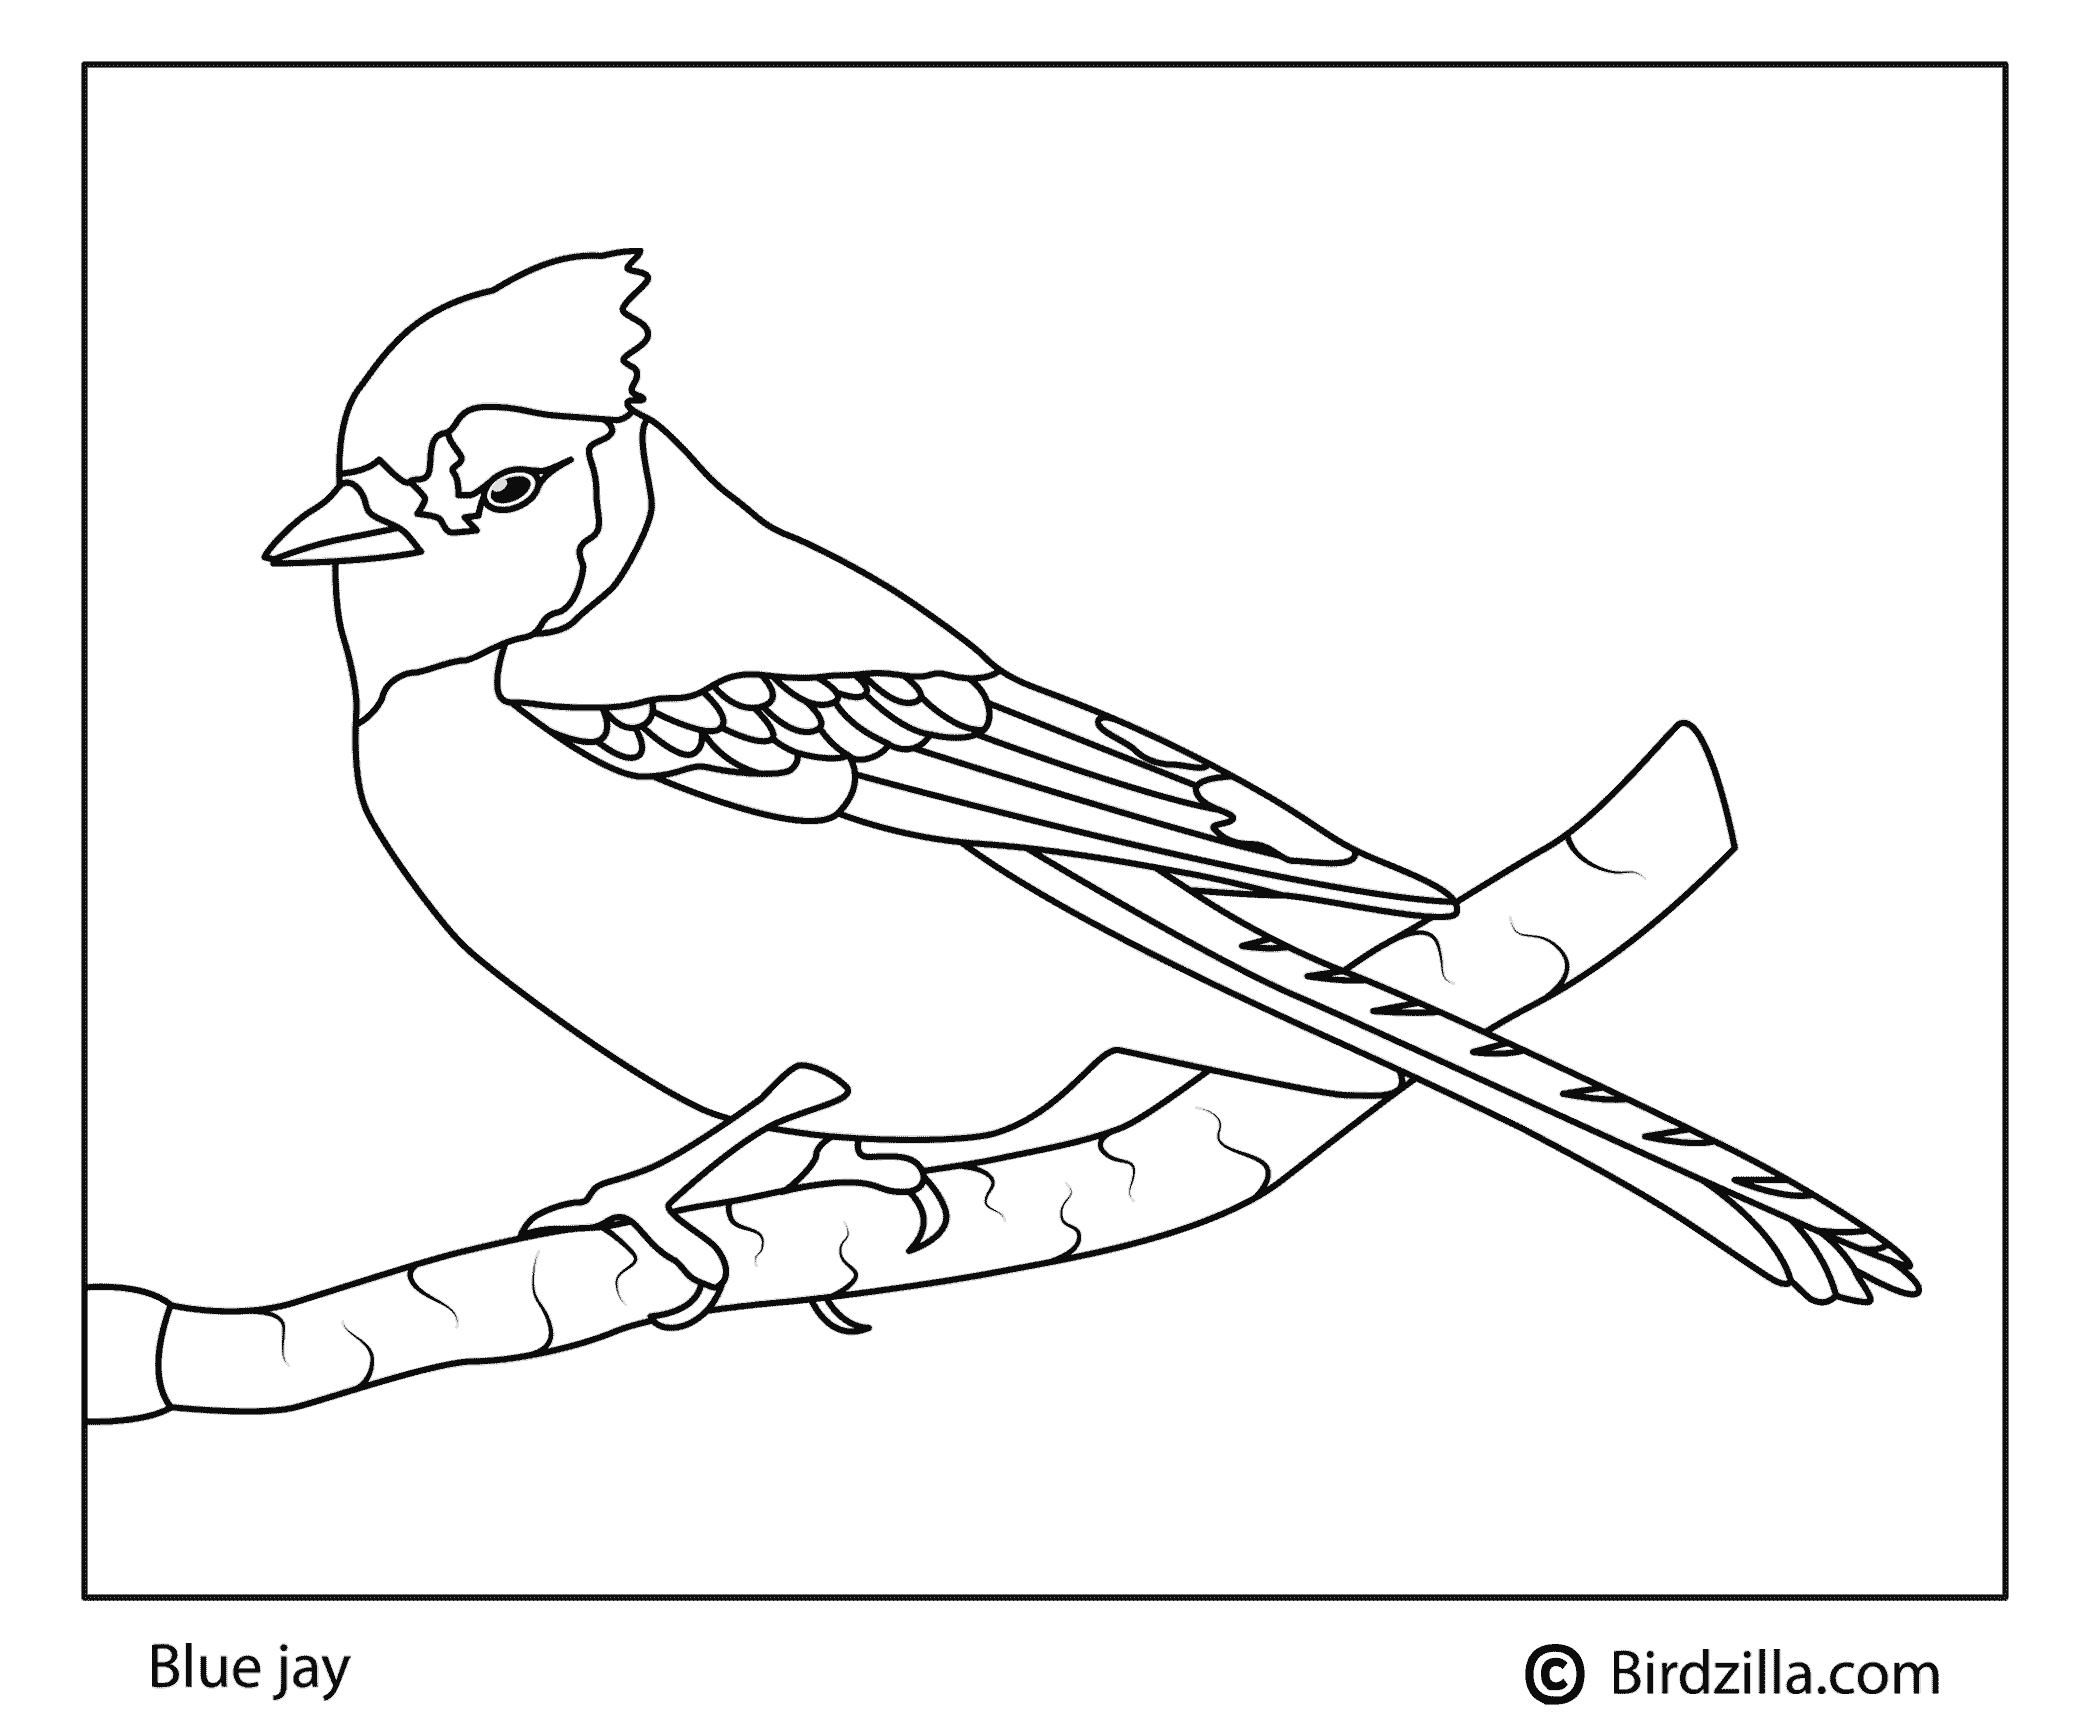 Blue Jay coloring page